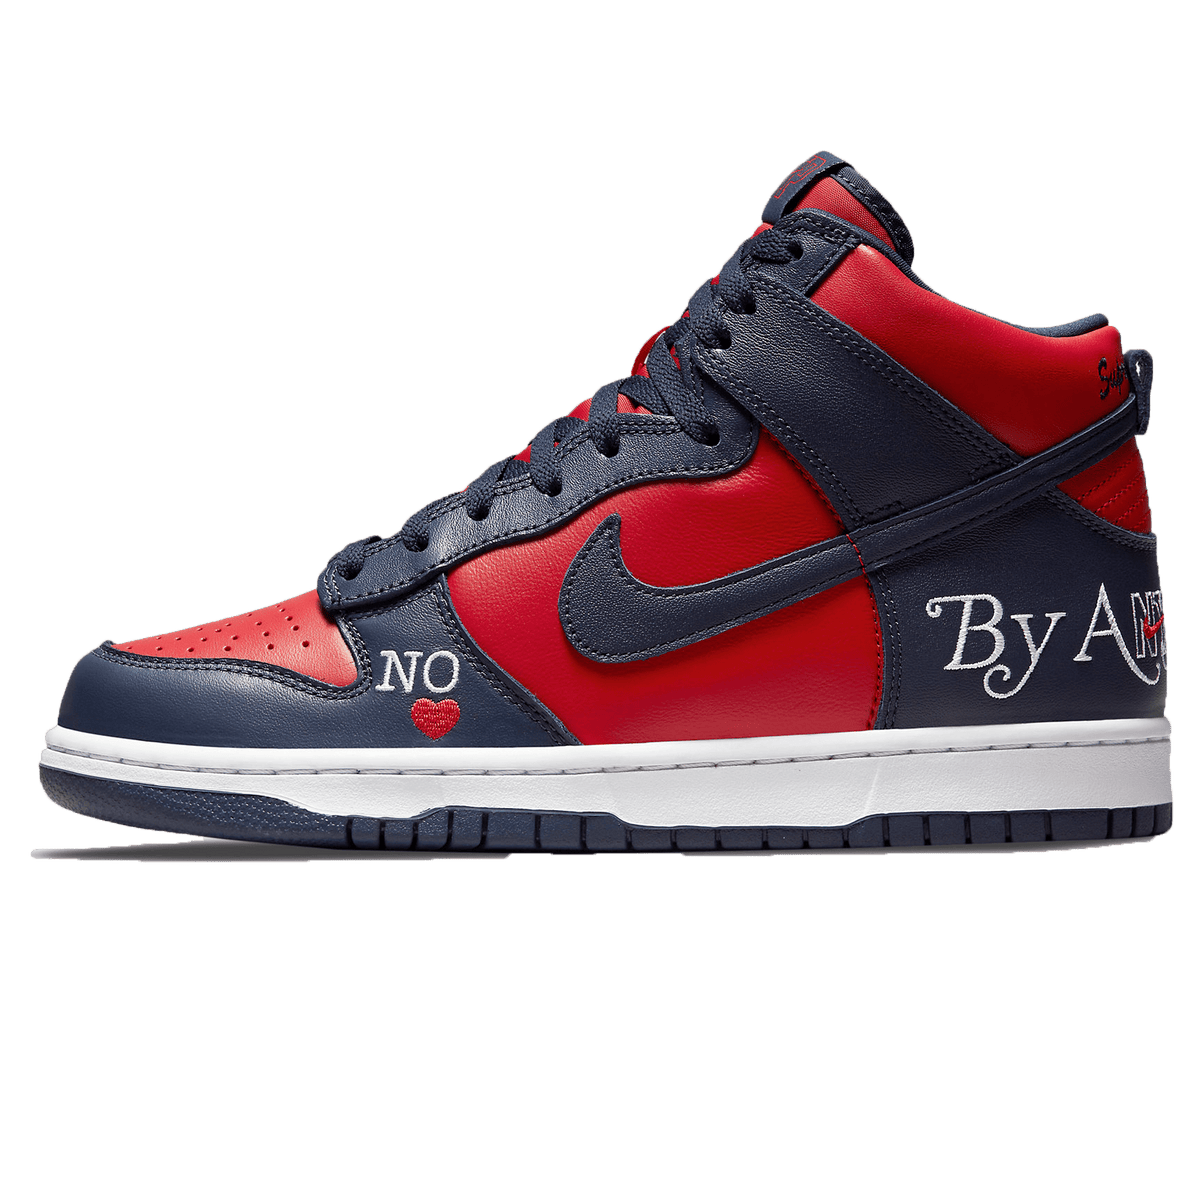 Supreme x Nike Dunk High SB 'By Any Means - Red Navy' - UrlfreezeShops